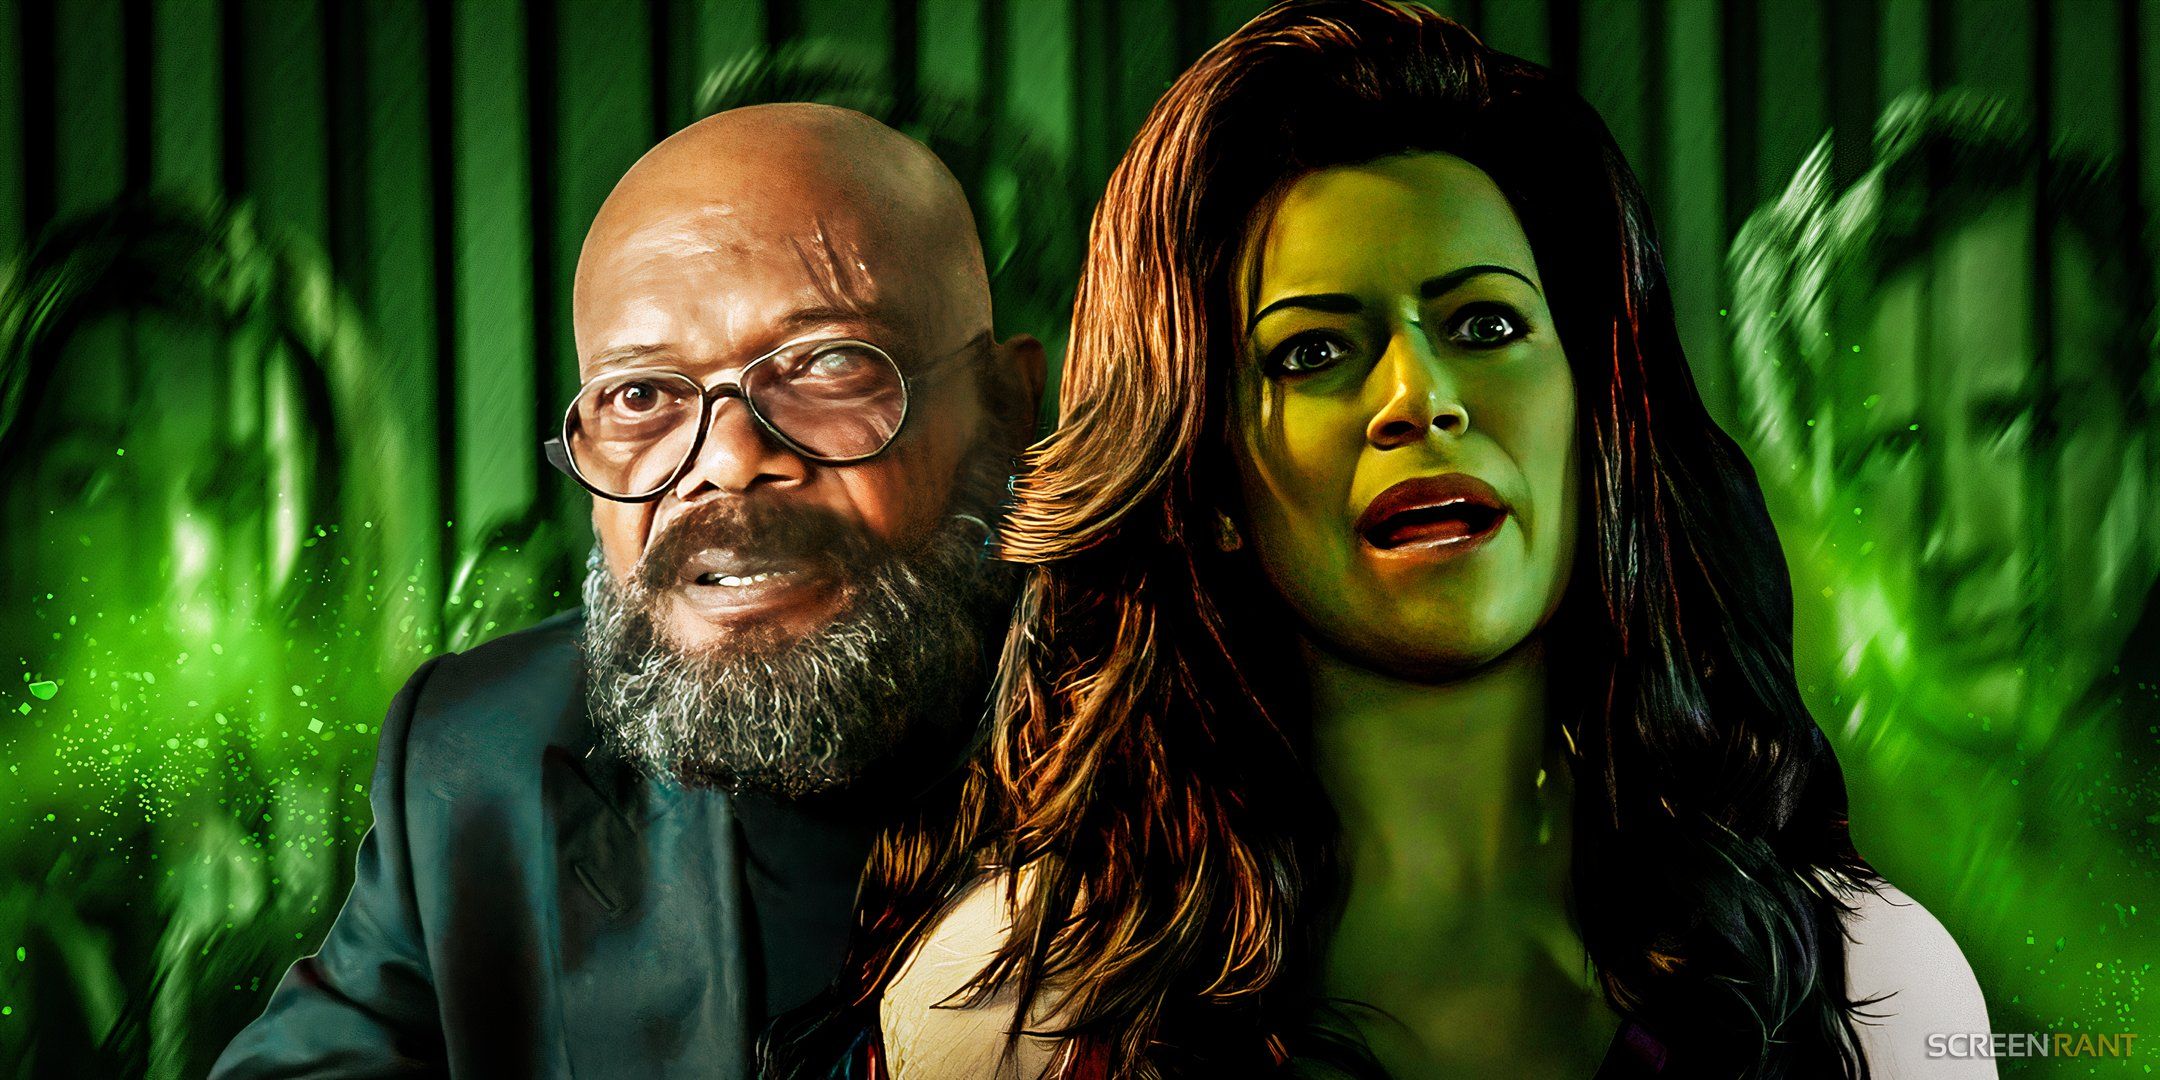 (Samuel L. Jackson as Nick Fury) from Secret Invasion and (She-Hulk in She-Hulk Attorney at Law) in front of Secret Invasion's Skrulls